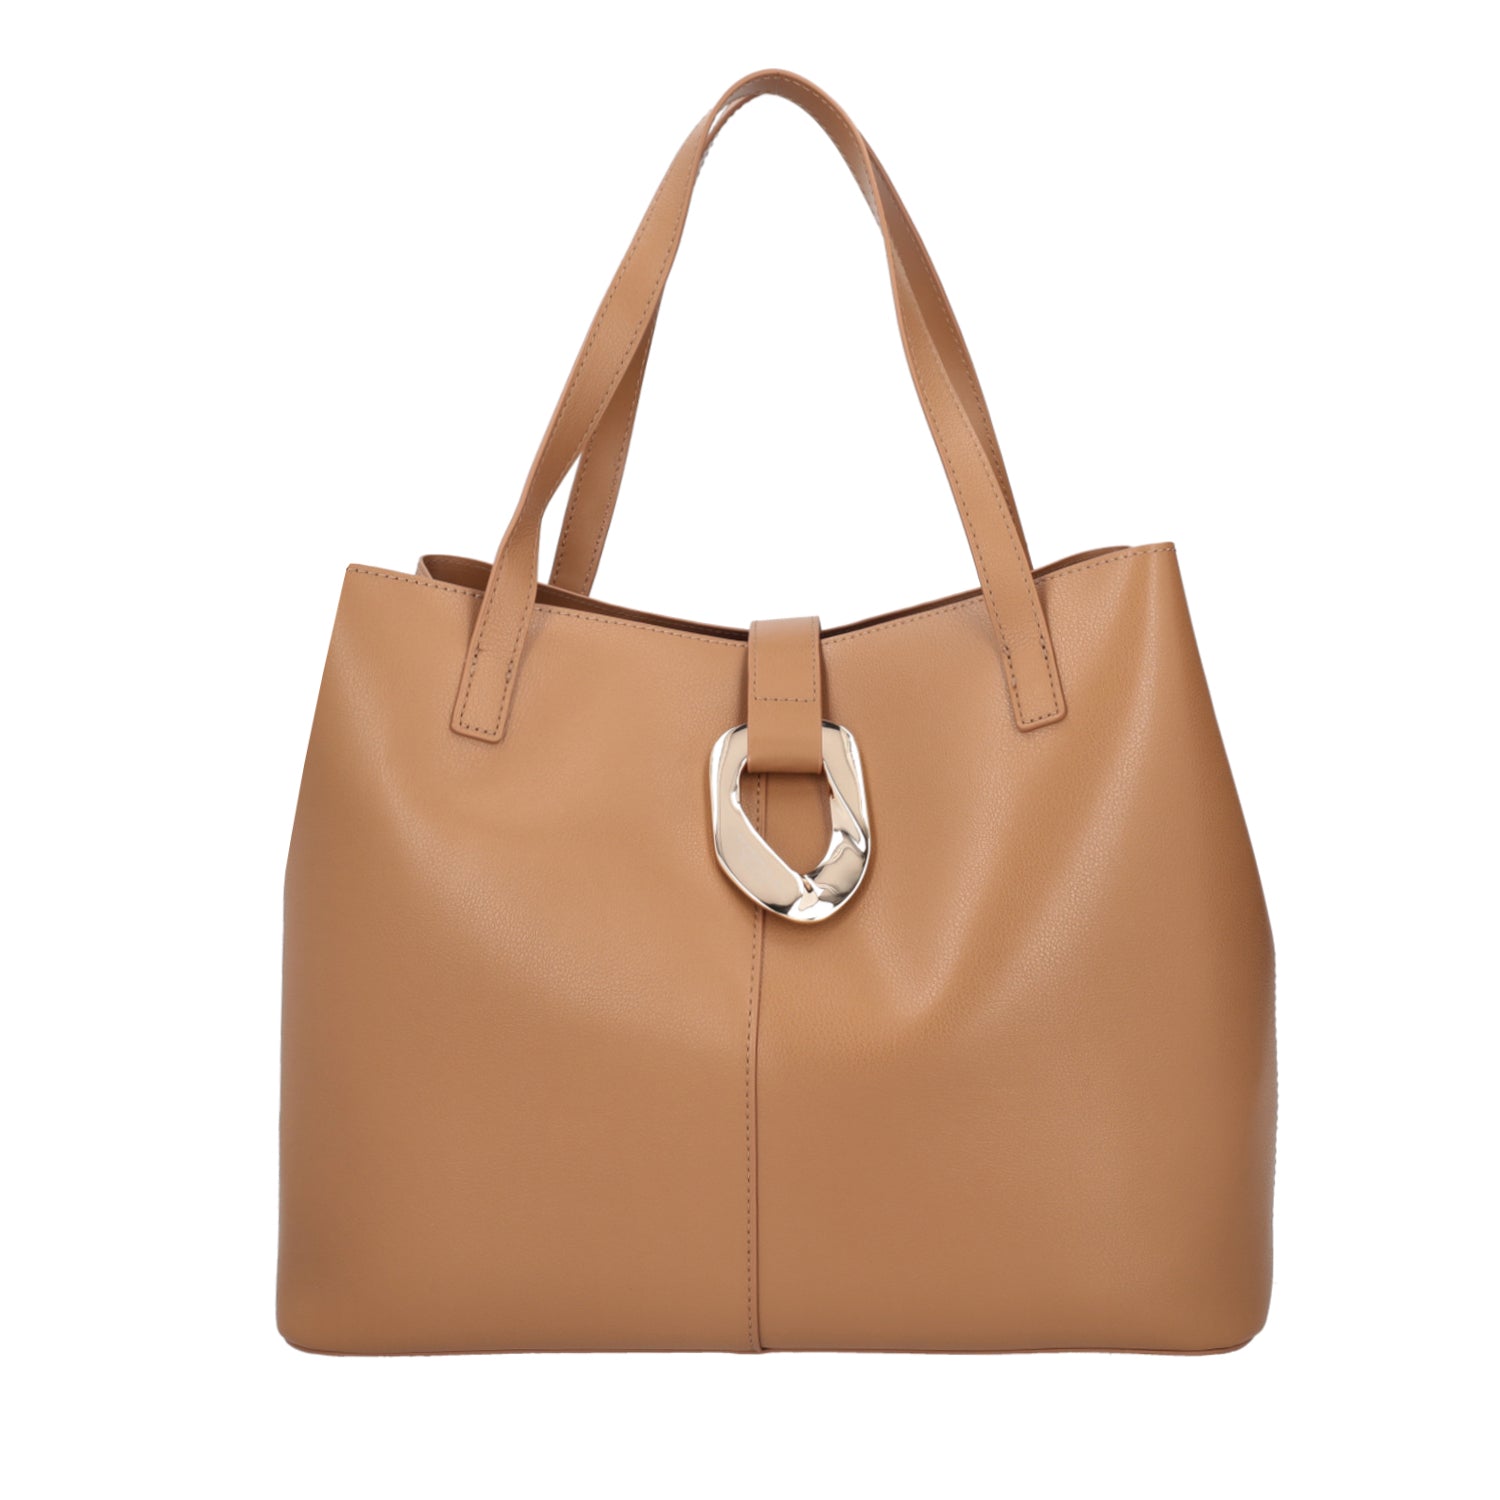 TAN PRIMULA SHOPPING BAG WITH GOLDEN ACCESSORY